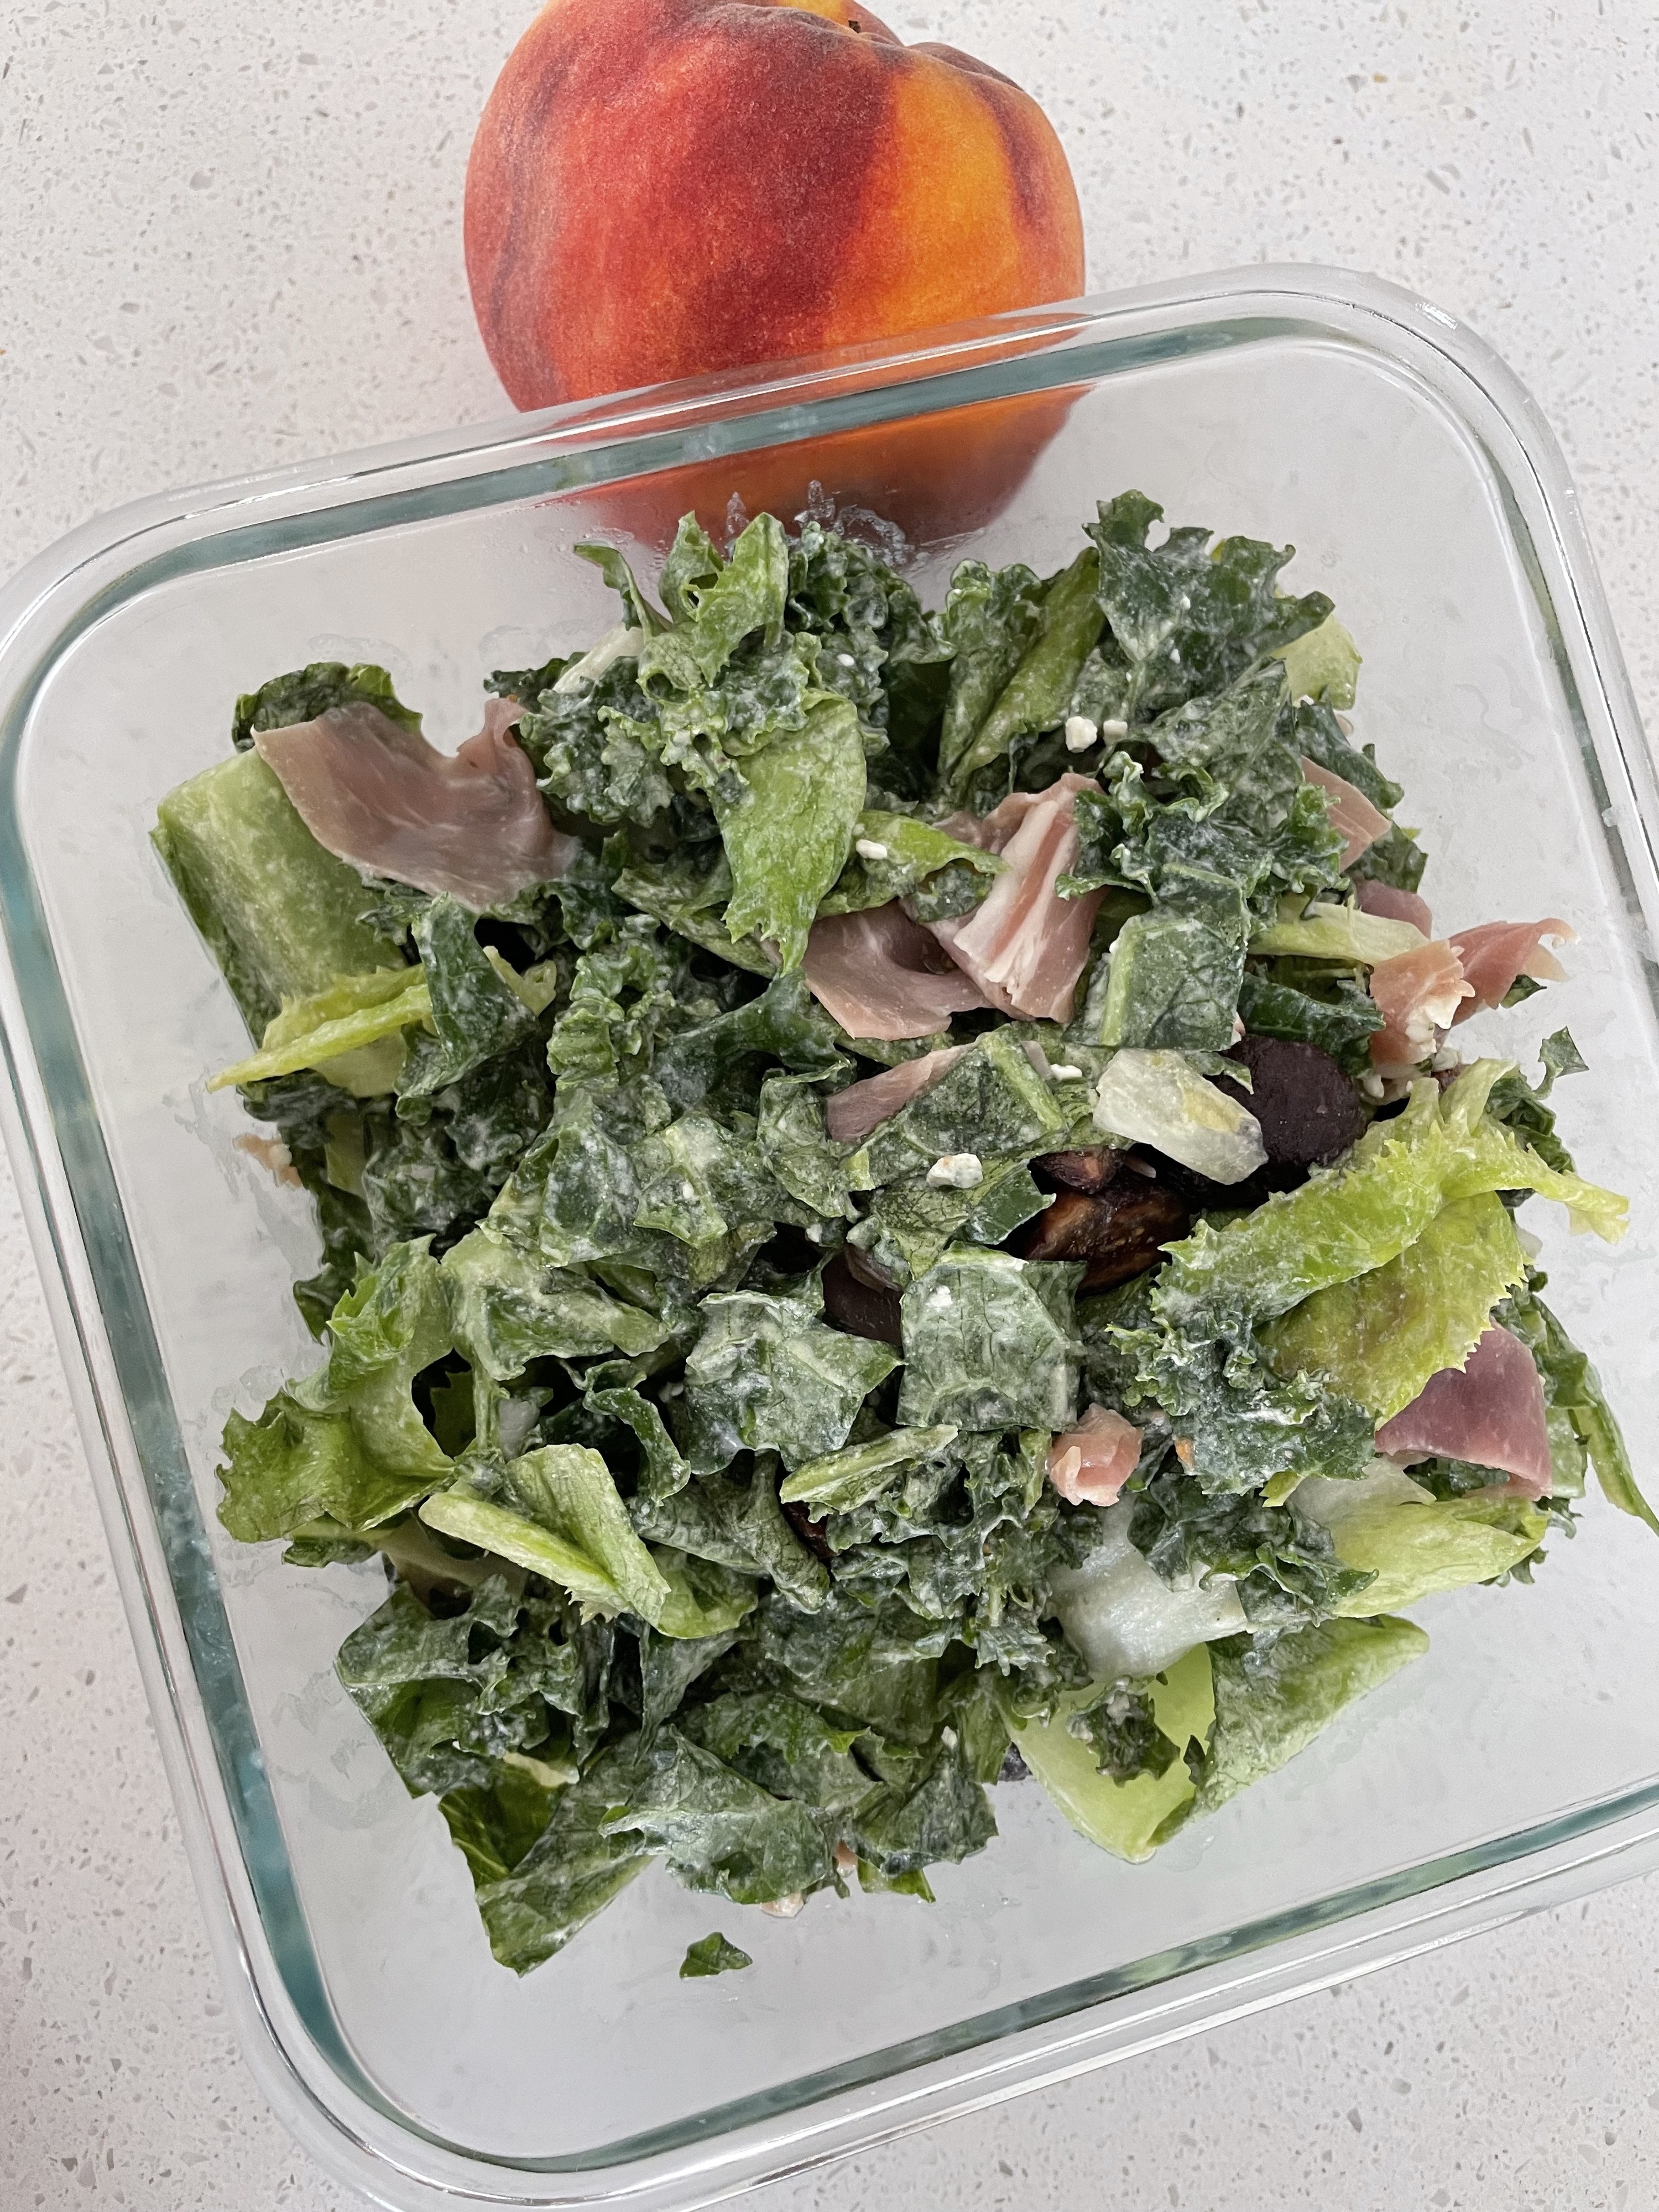 leftover kale salad with a peach